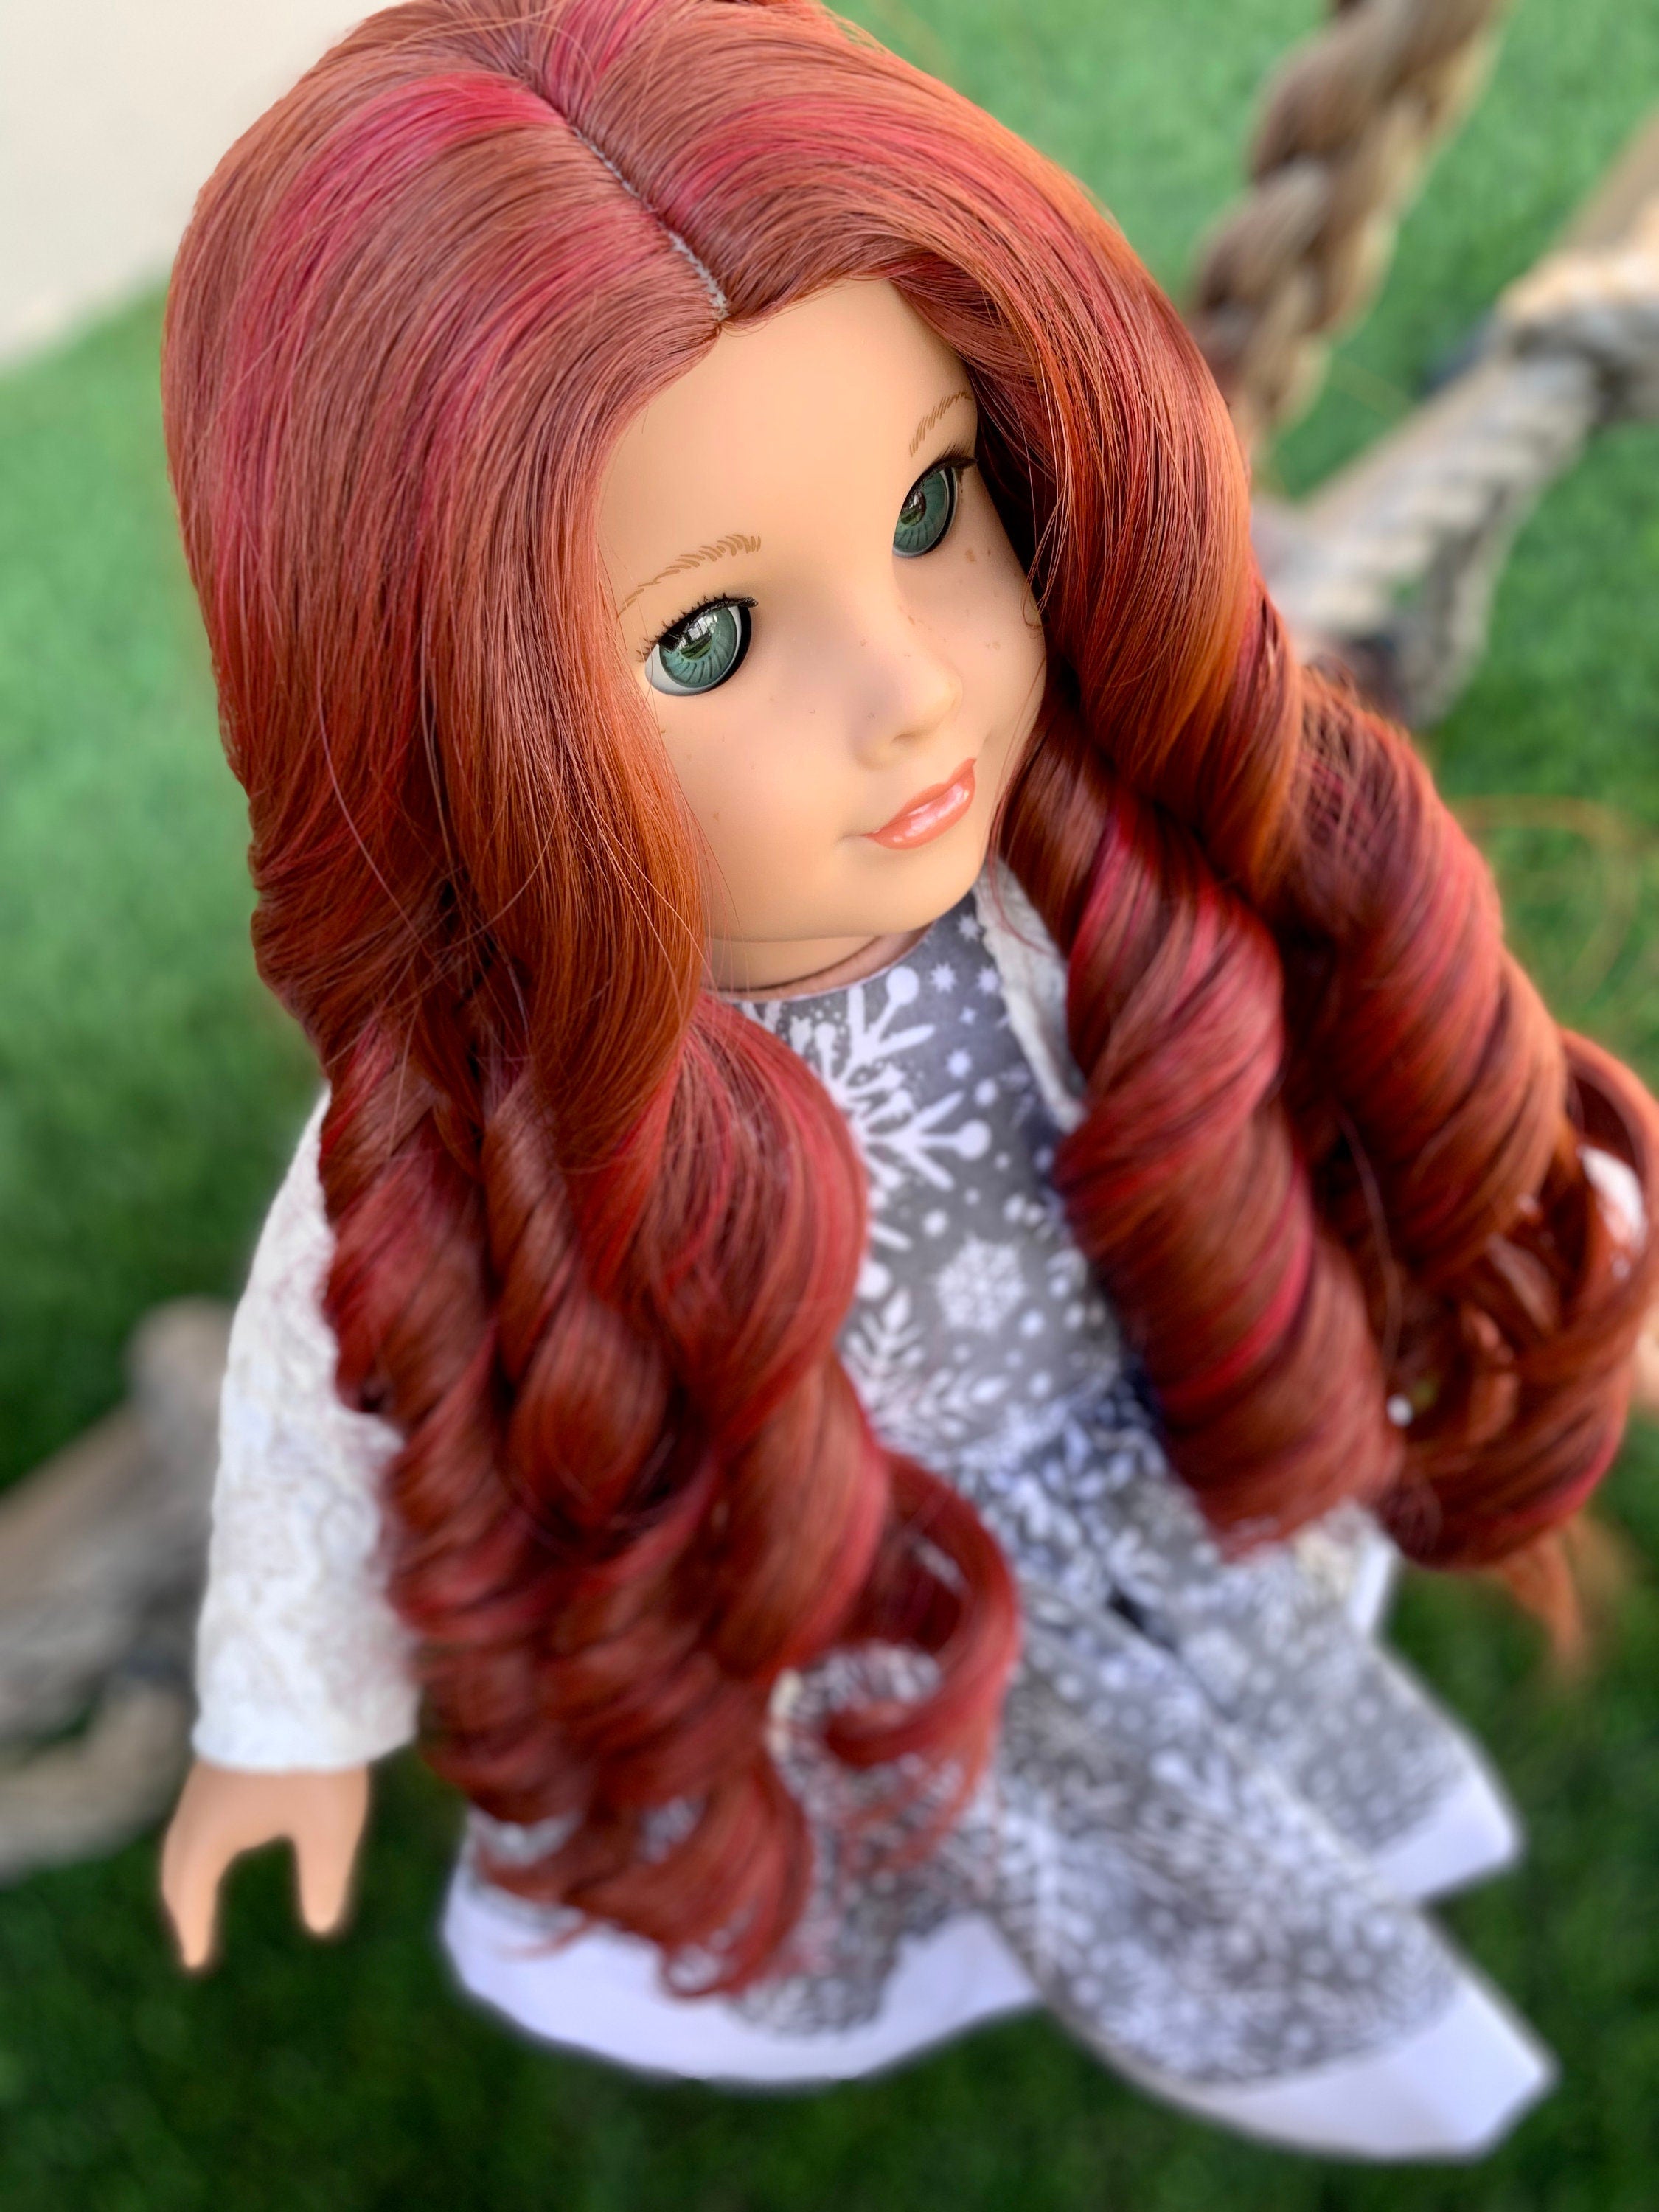 Custom doll wig for 18" American Girl Dolls - Heat Safe - Tangle Resistant - fits 10-11" head size of 18" dolls  Blythe BJD Gotz Fire red